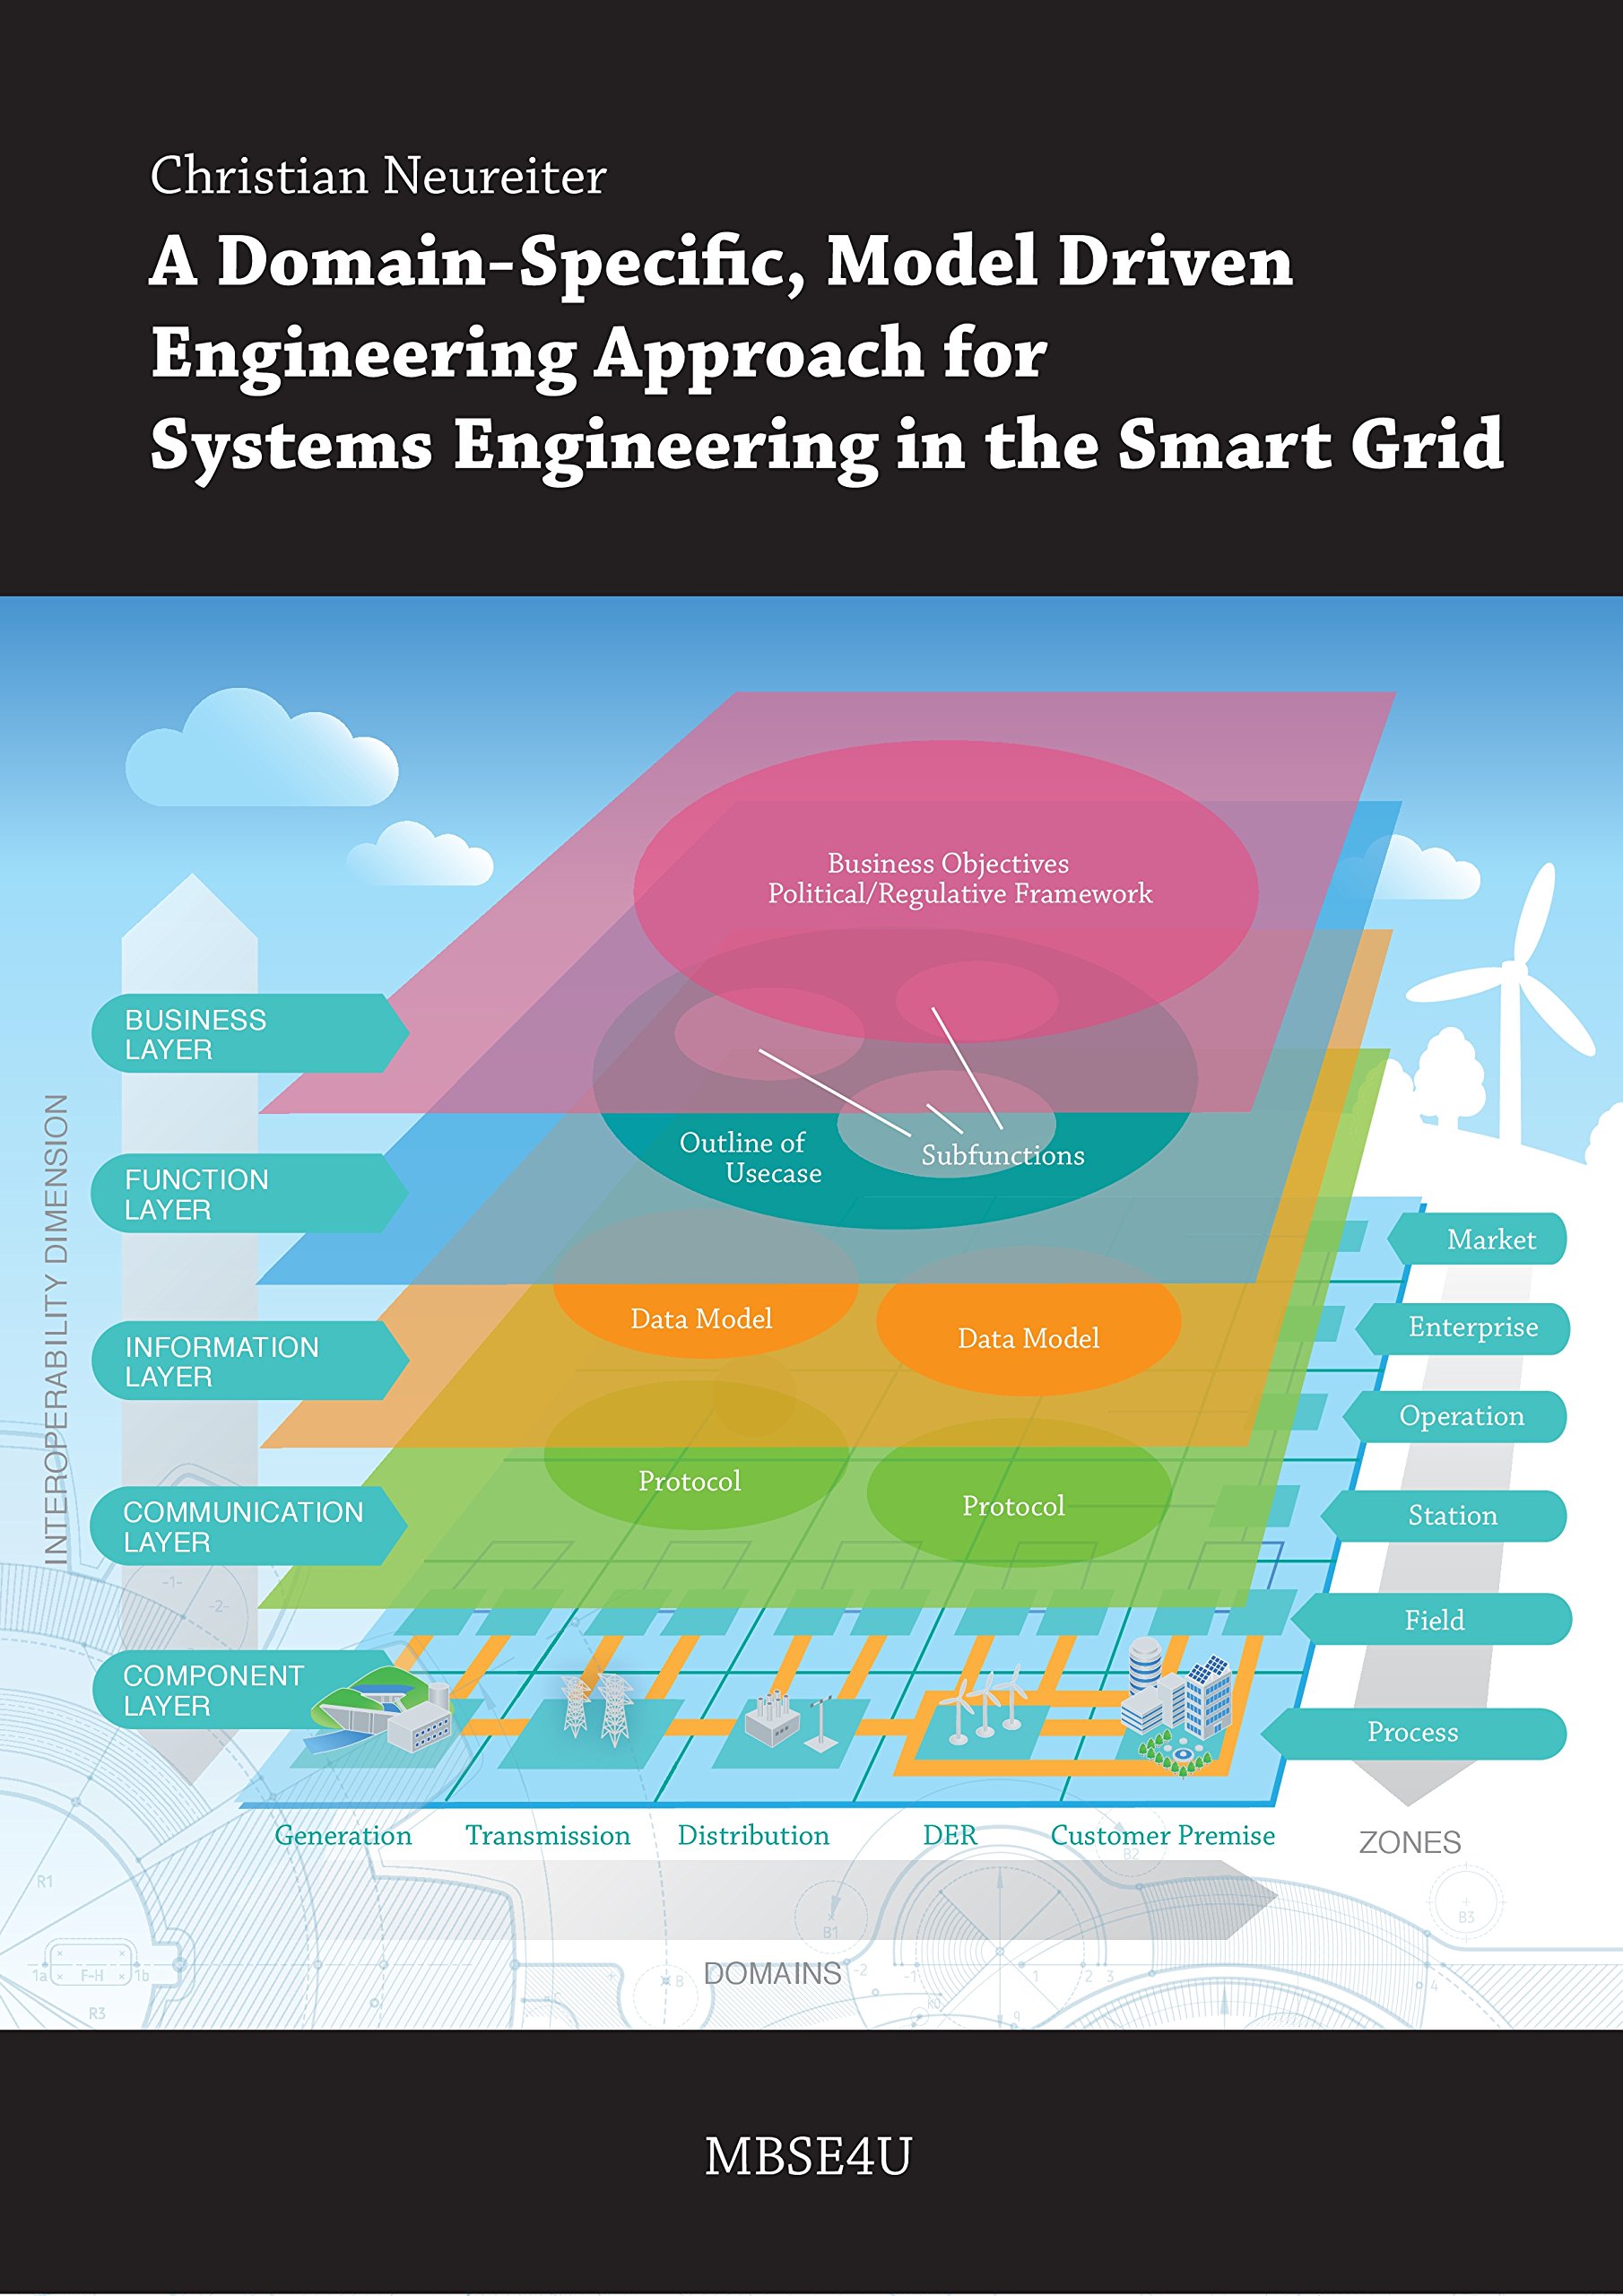 Book Cover: A Domain-Specific, Model Driven Engineering Approach for Systems Engineering in the Smart Grid